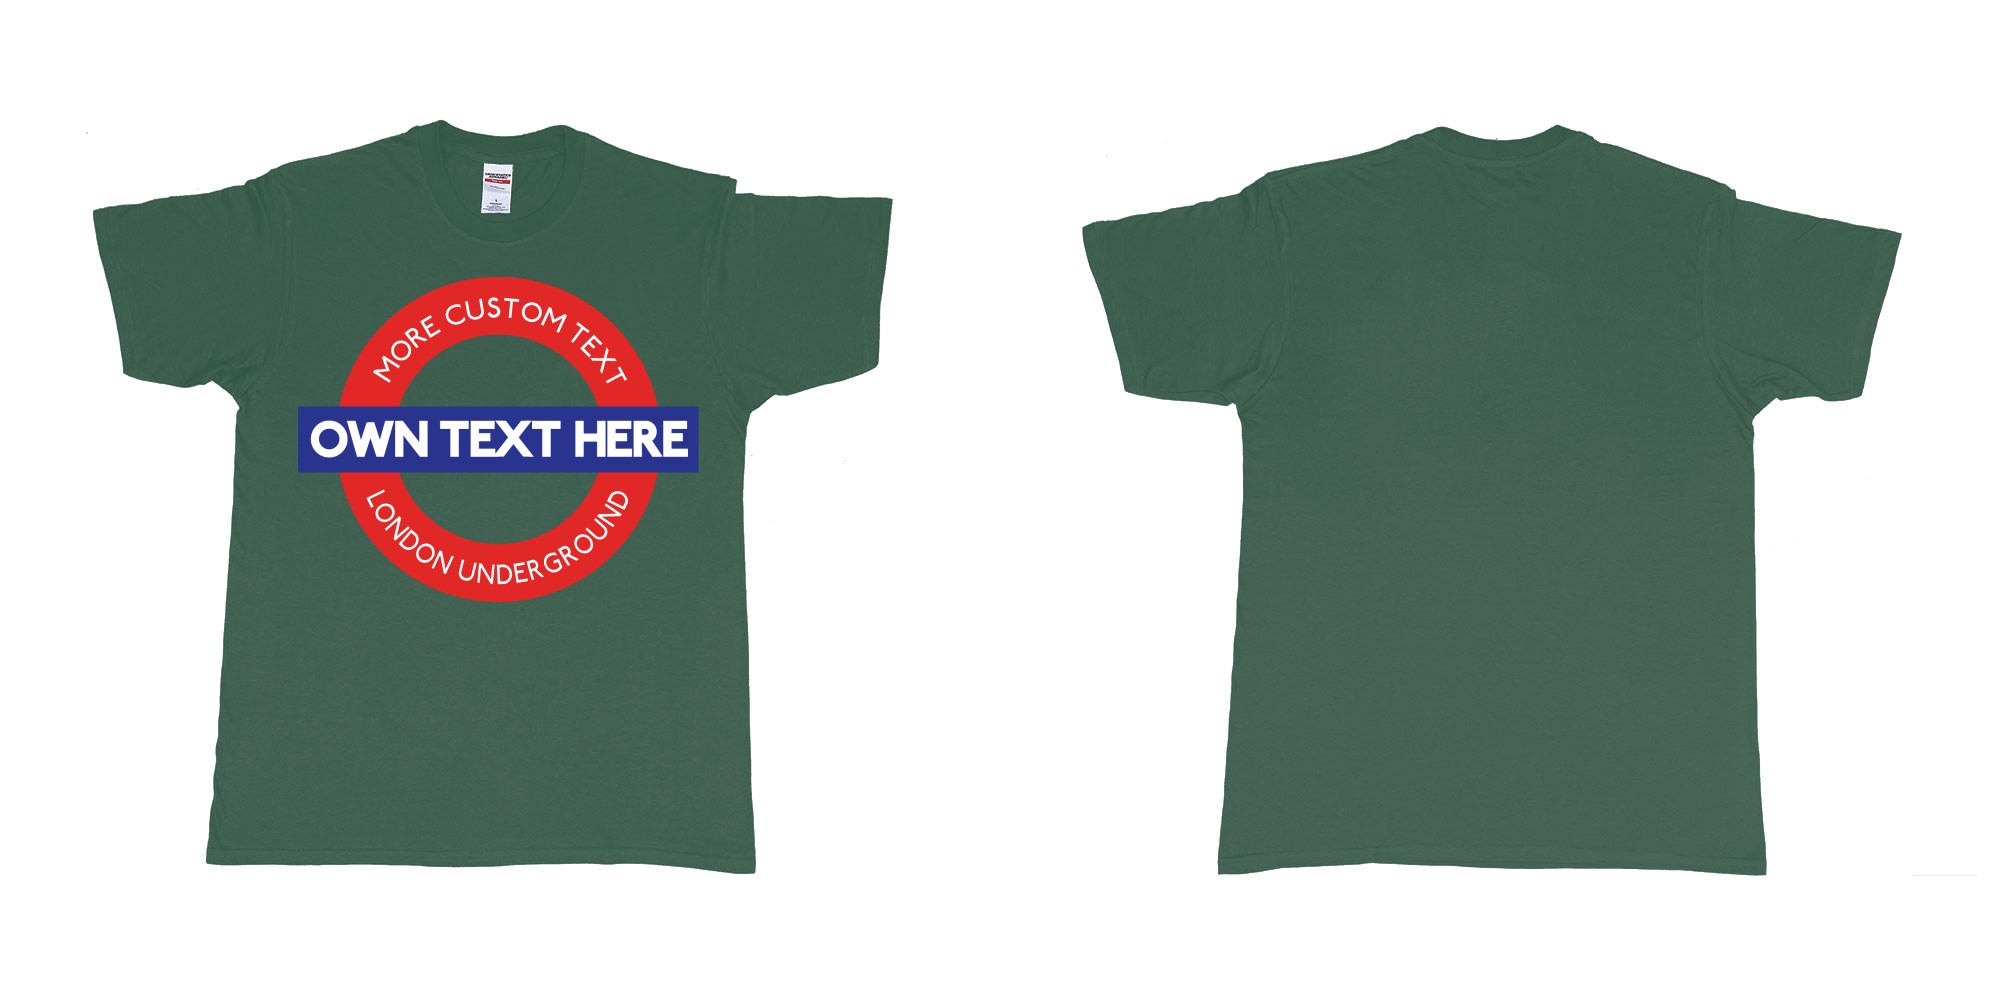 Custom tshirt design london underground logo custom design in fabric color forest-green choice your own text made in Bali by The Pirate Way